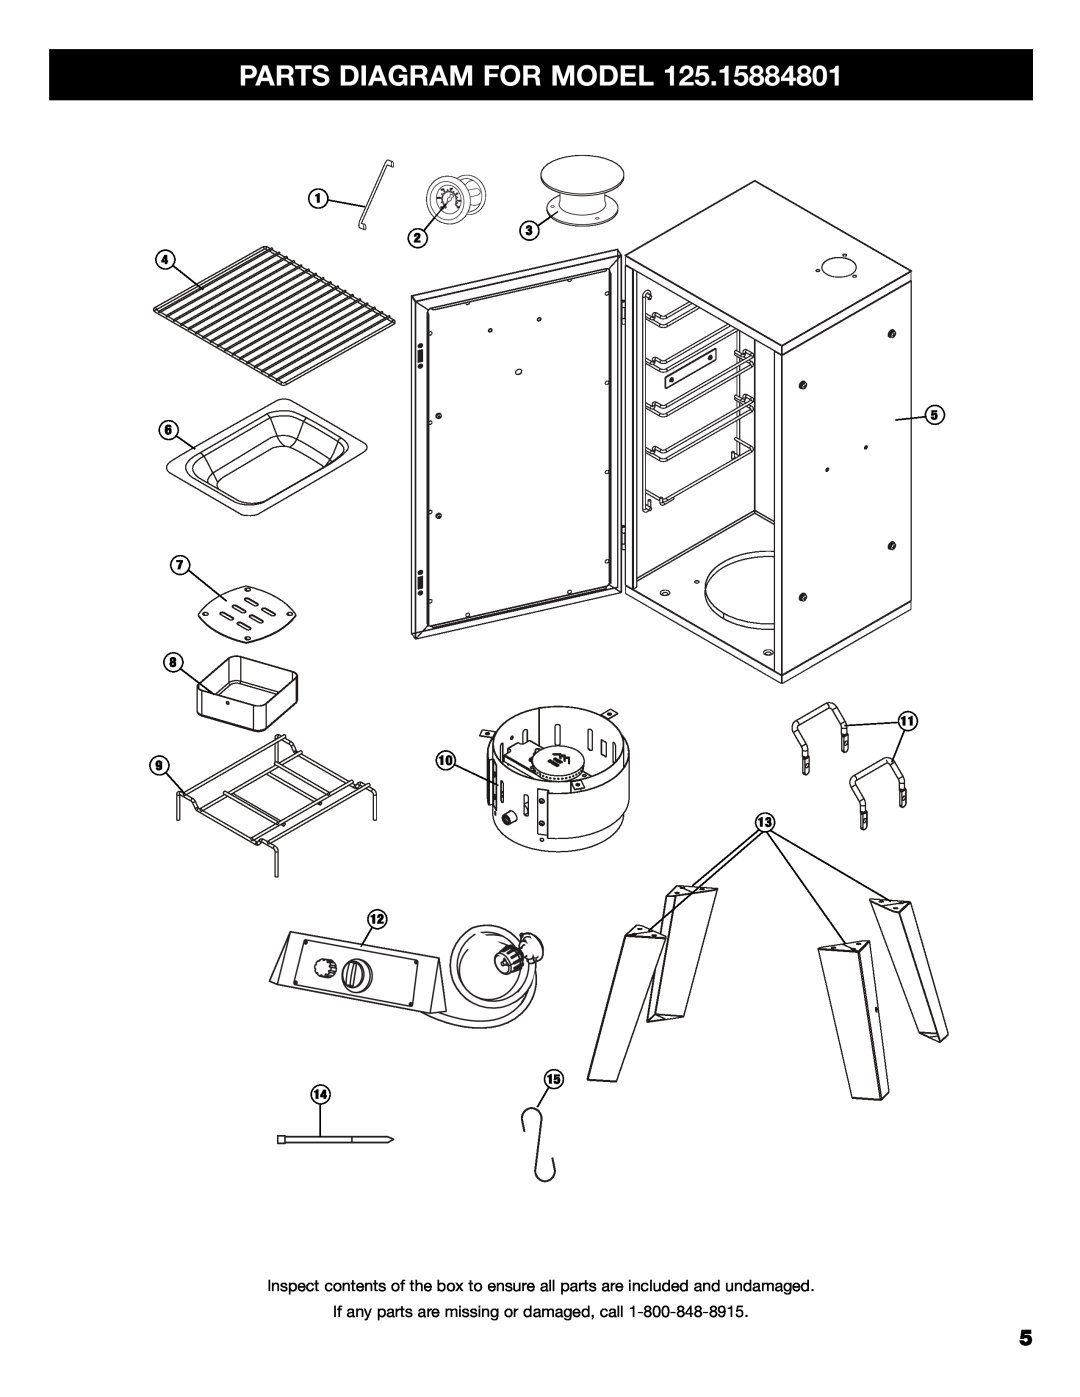 Kenmore 125.15884801 owner manual Parts Diagram For Model, If any parts are missing or damaged, call 